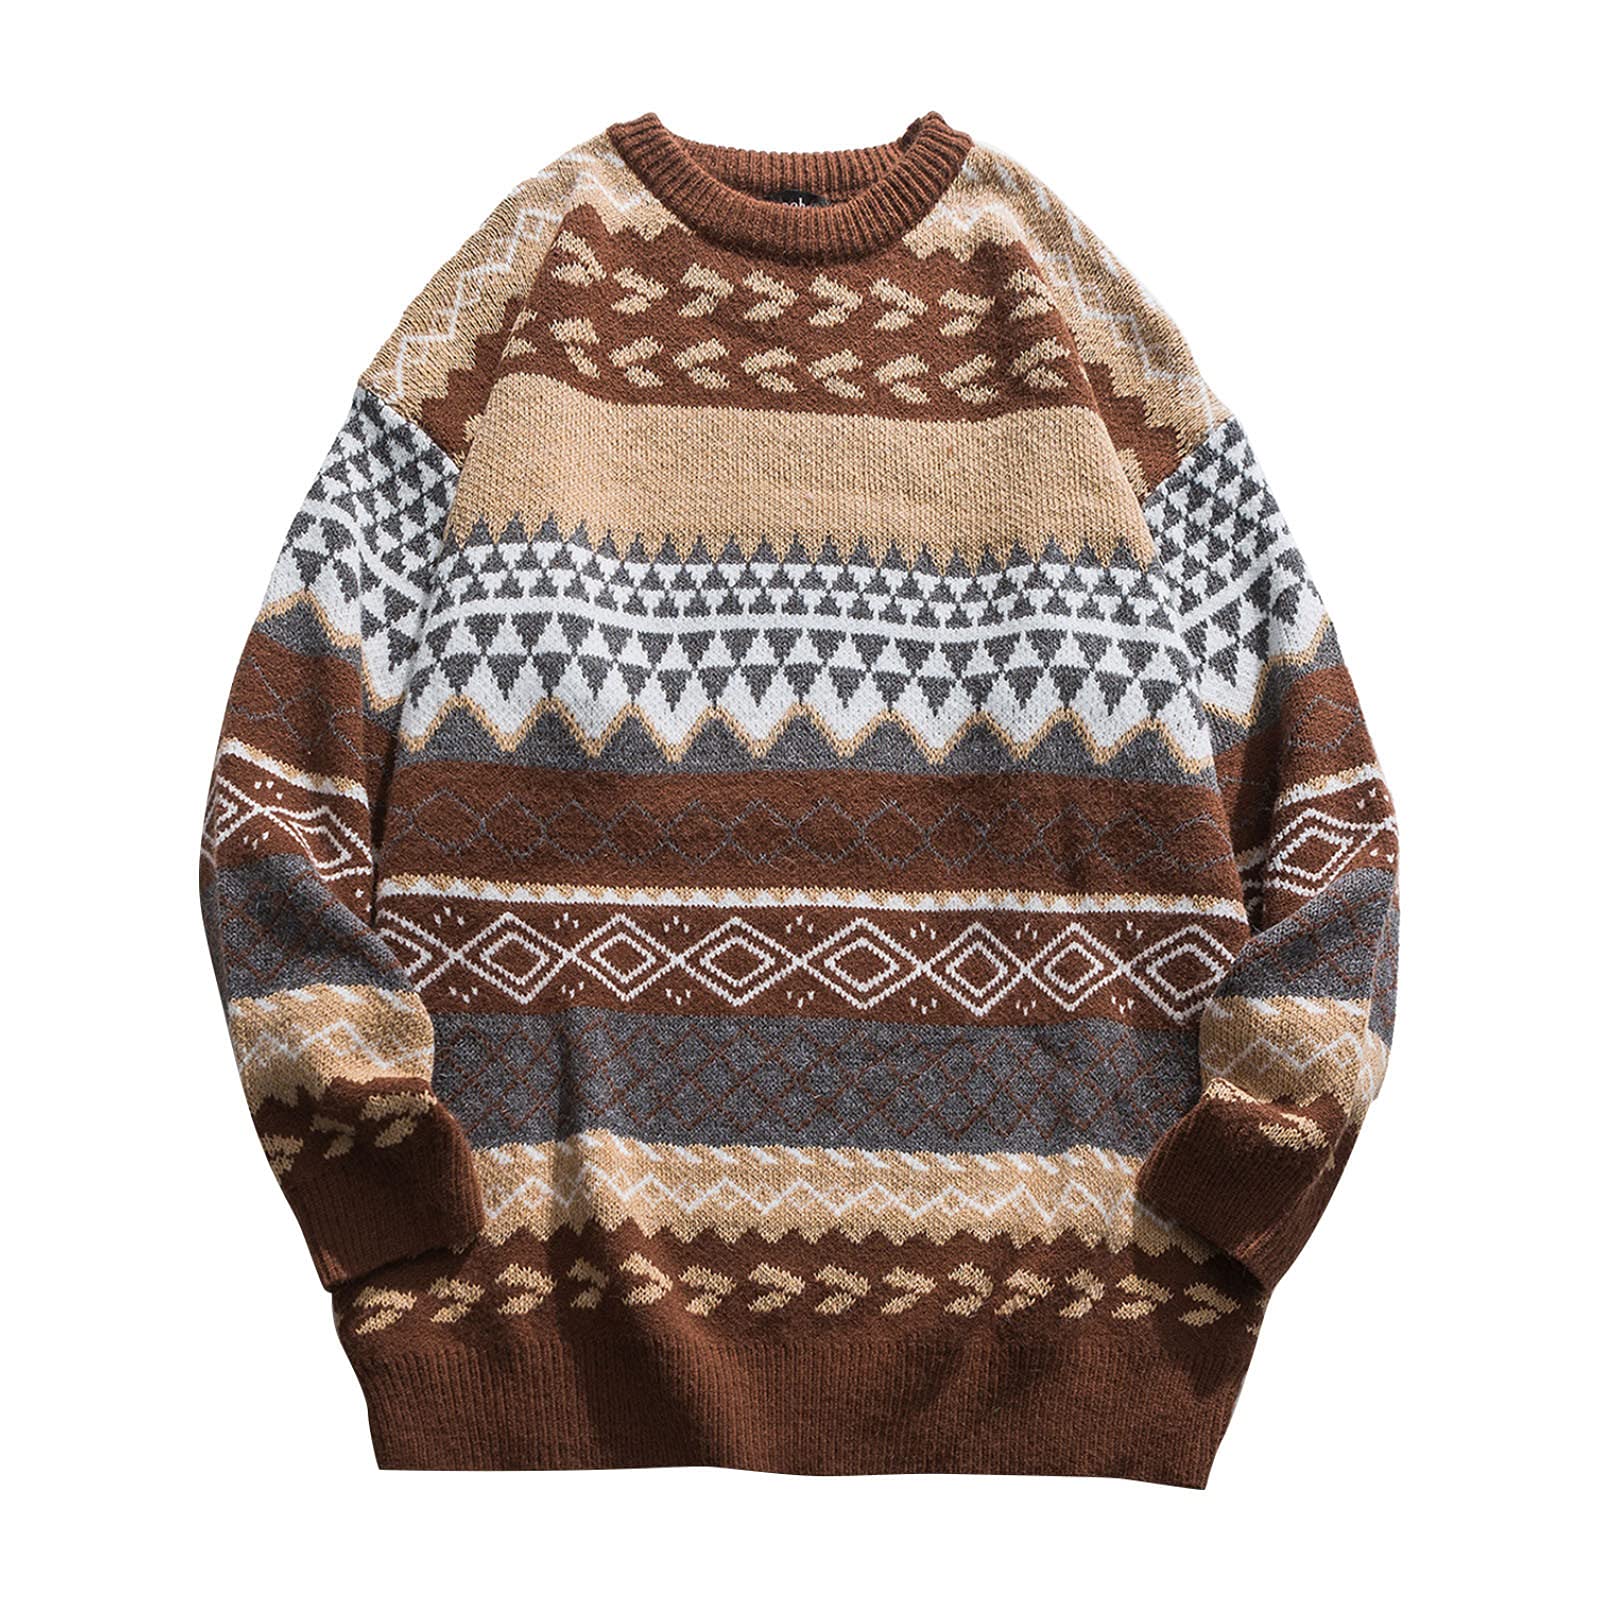 Mens fall sweater, fall is a season of change, where the weather becomes cooler and the leaves start to change color.